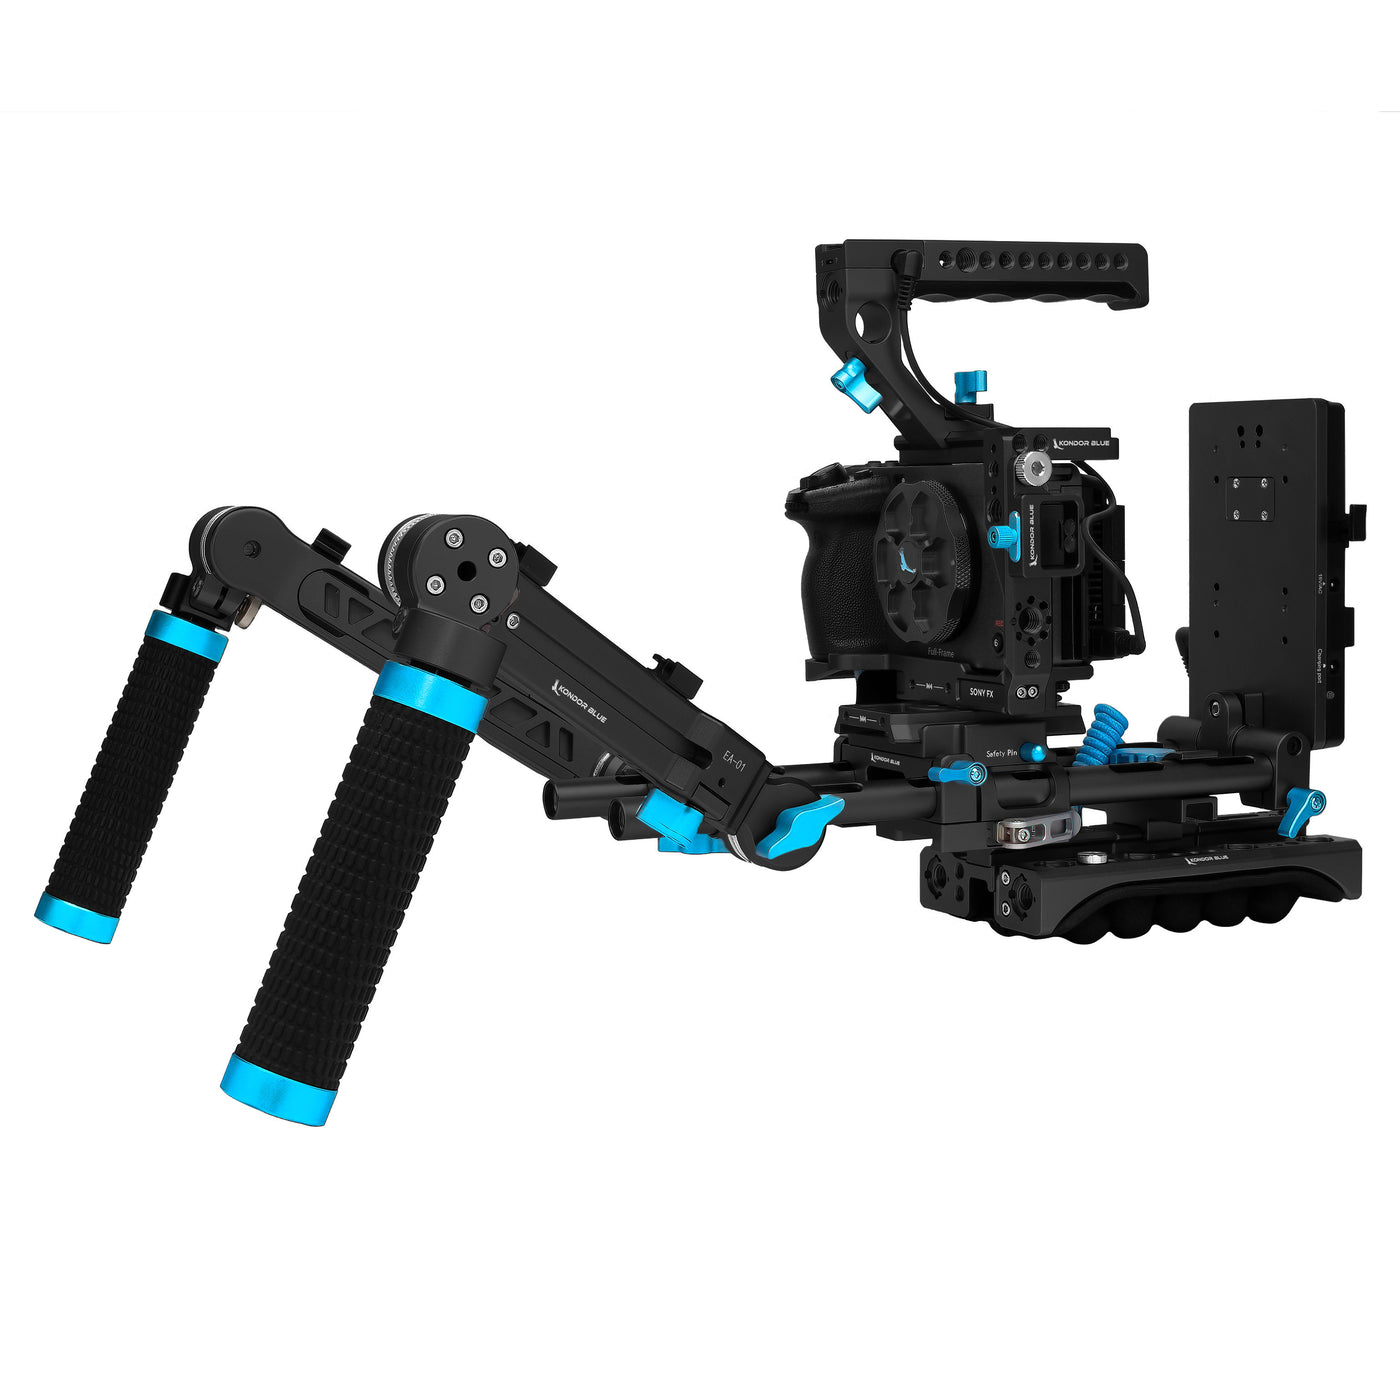 Sony FX3/FX30 Cage